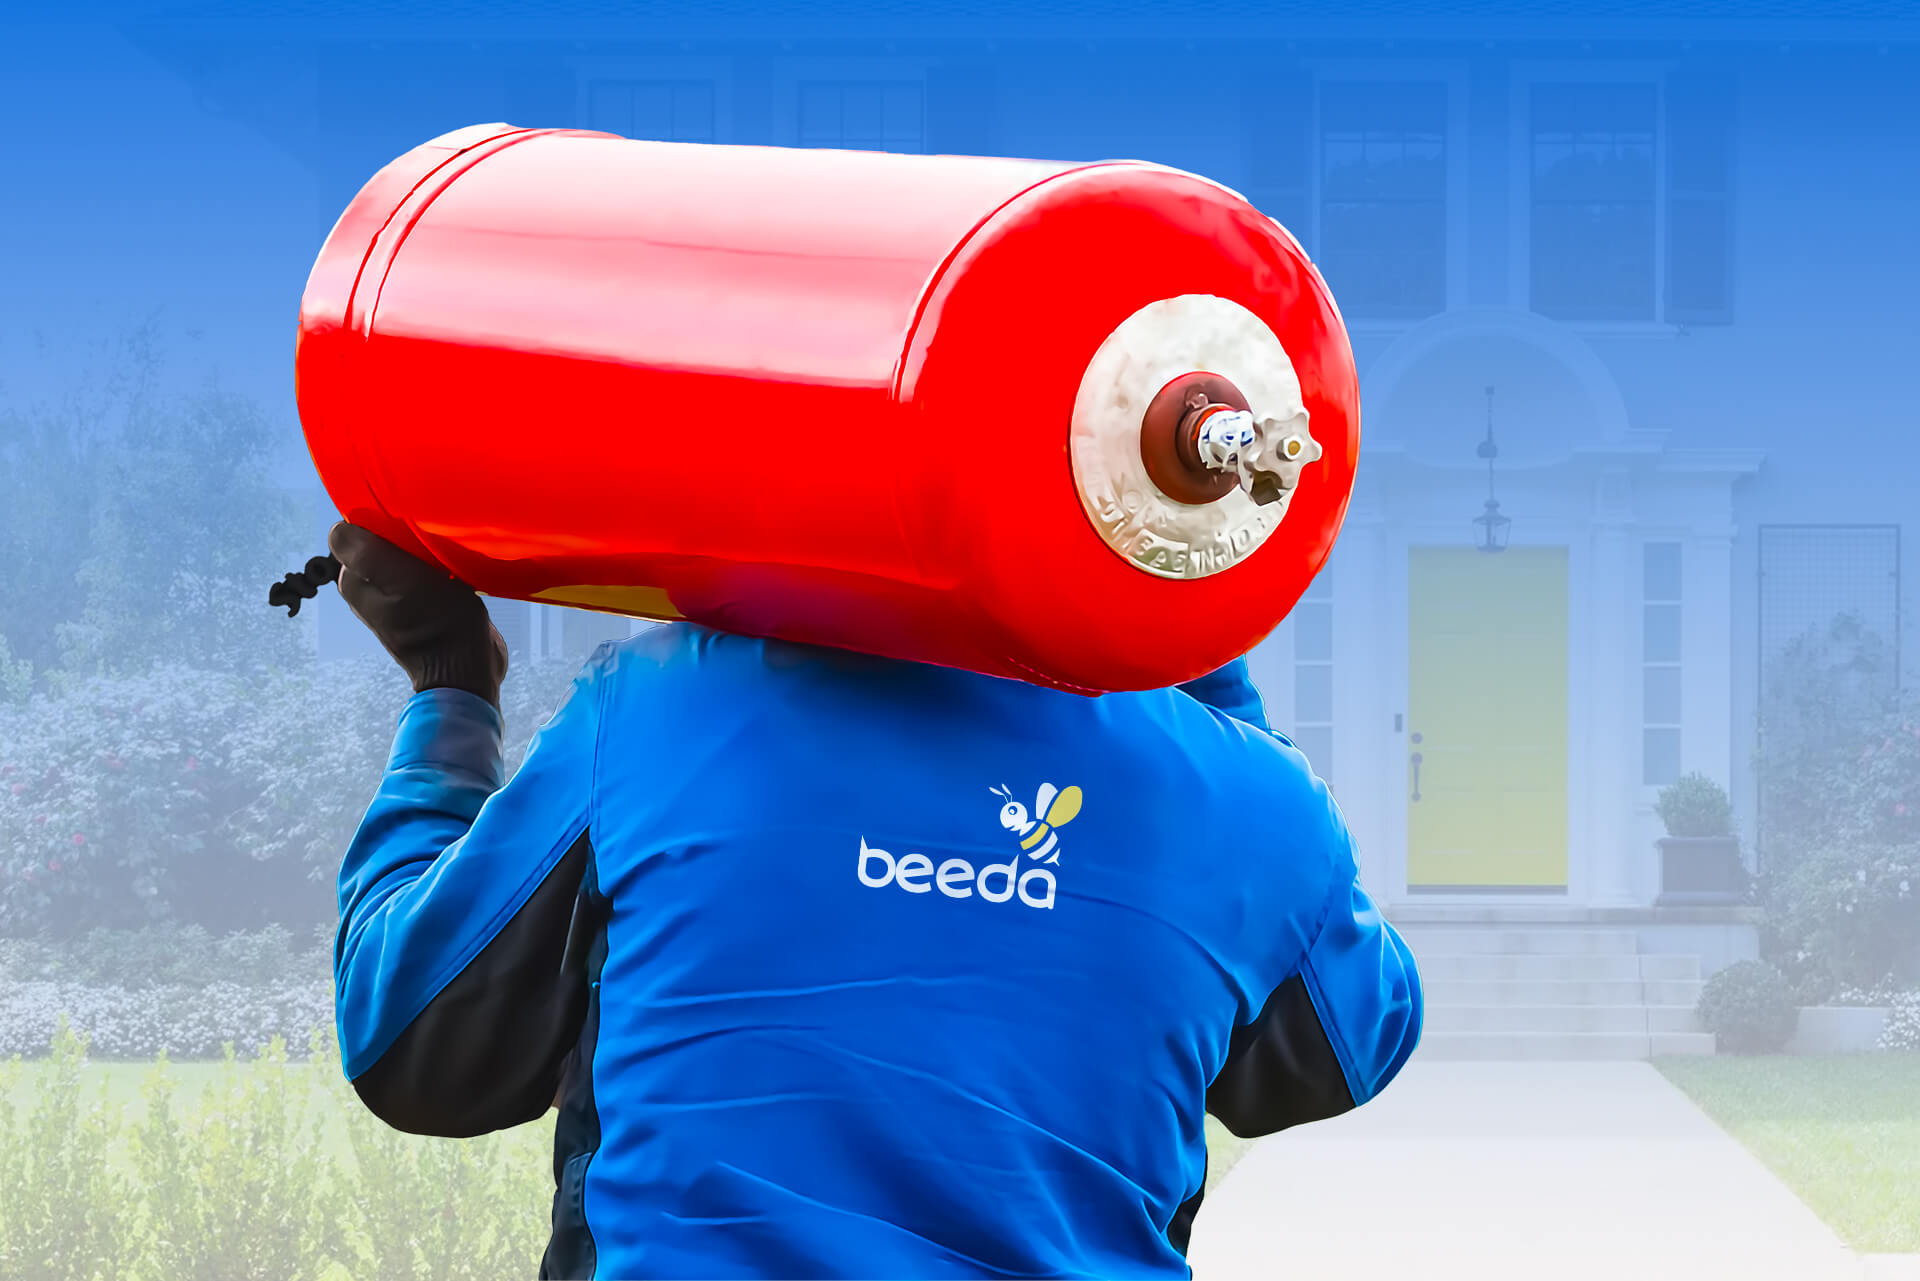 Get Your Gas At Your Doorstep with Beeda Gas Delivery Service